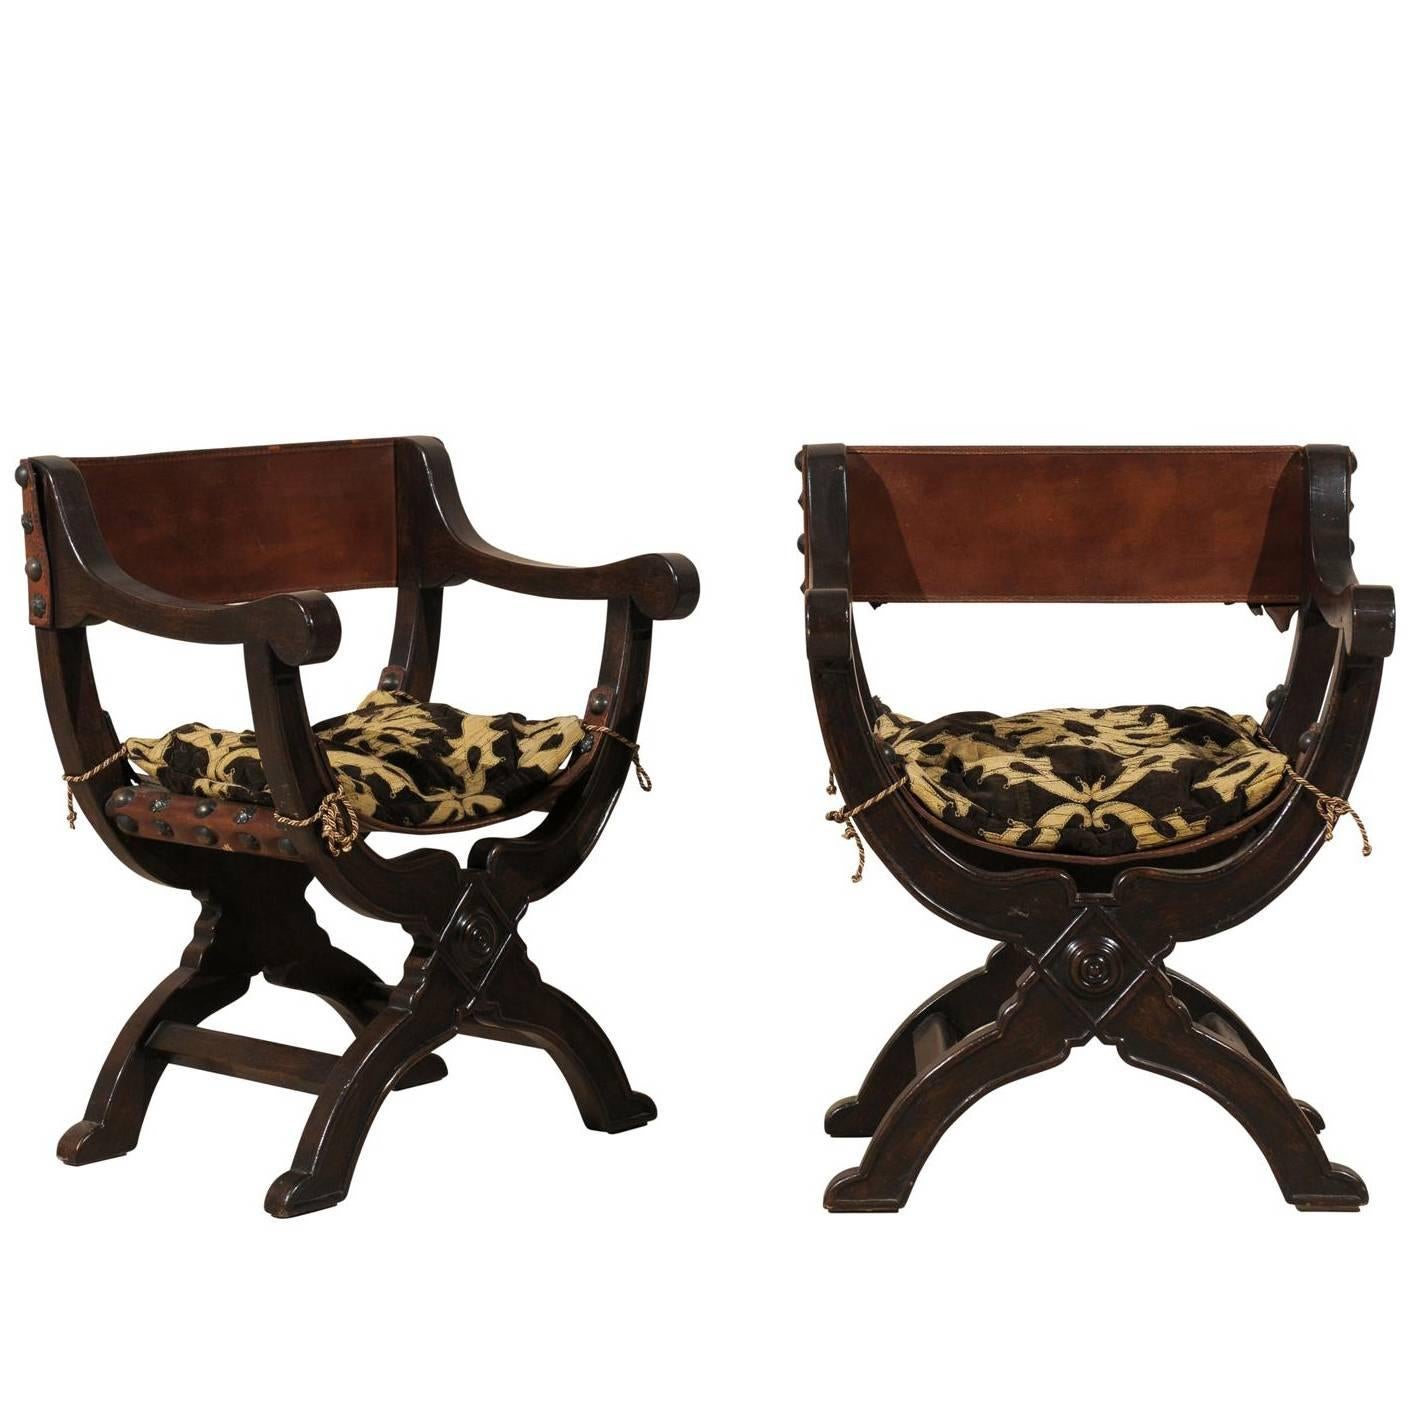 Pair of Italian "Dante" Style Wooden Chairs with Leather Back and Seat